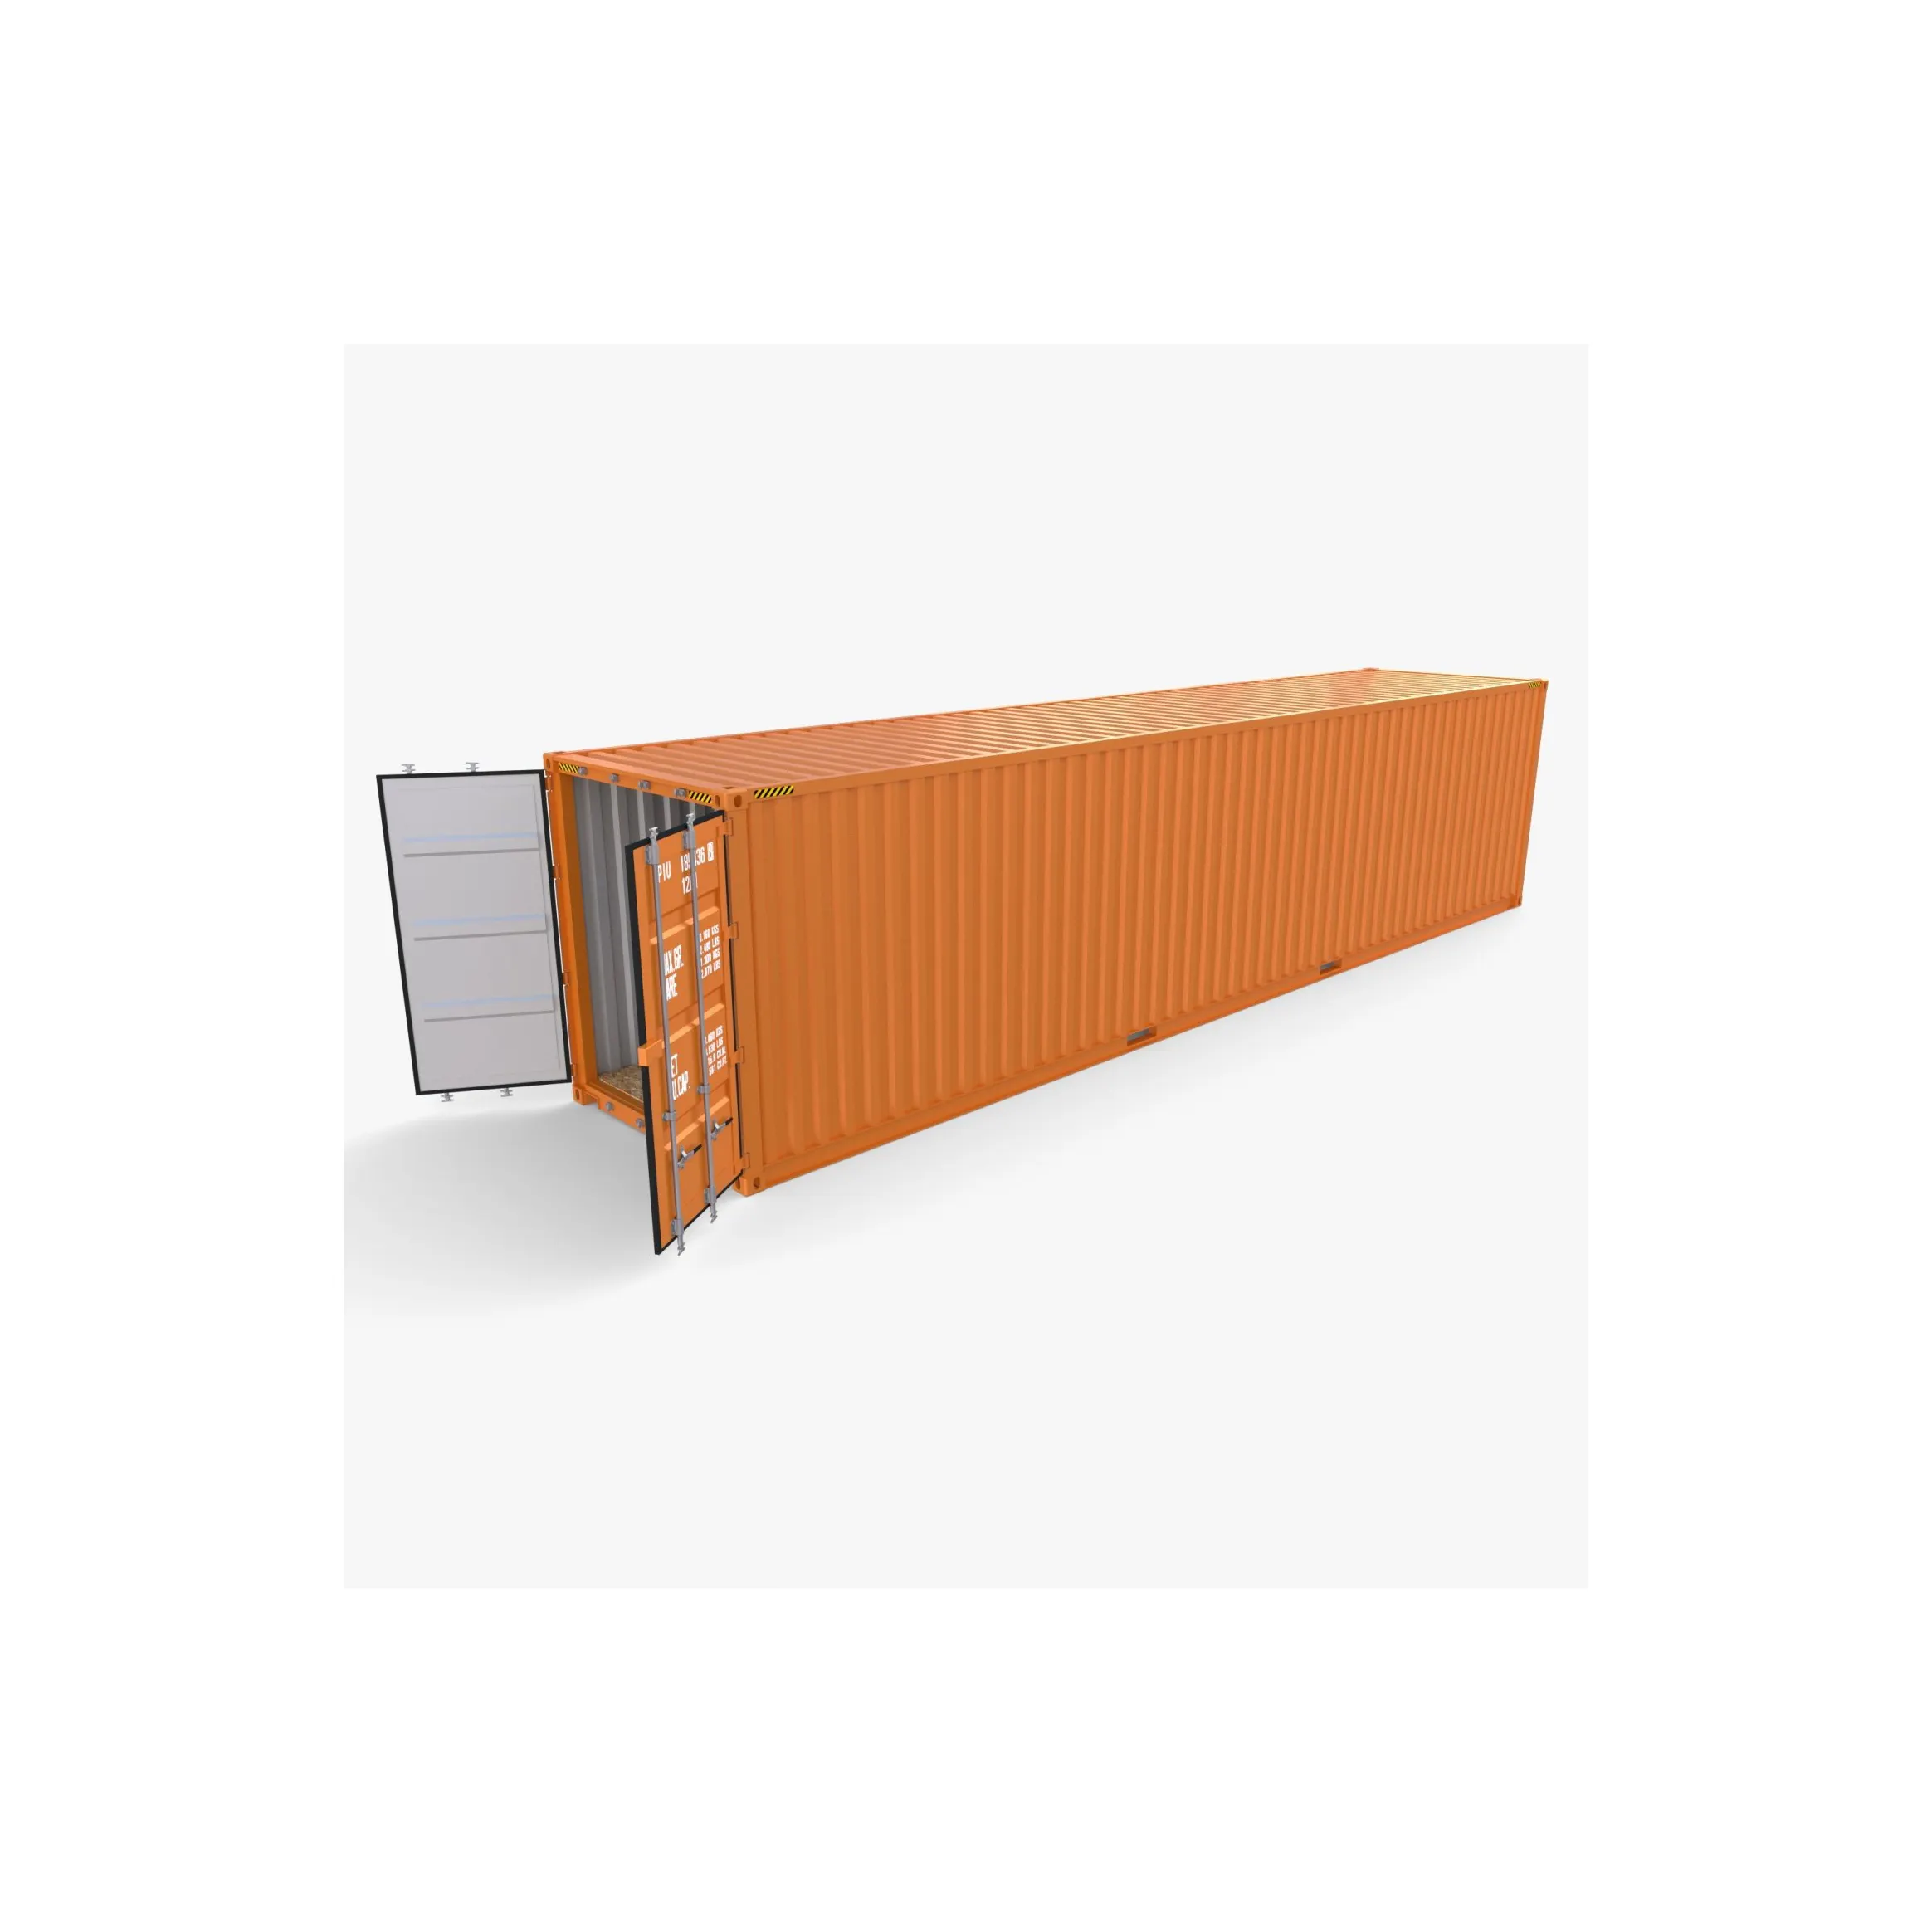 Wholesale good quality used Cargo worthy 20ft High Cube 20ft Dry Shipping Container Price for Sale at low price